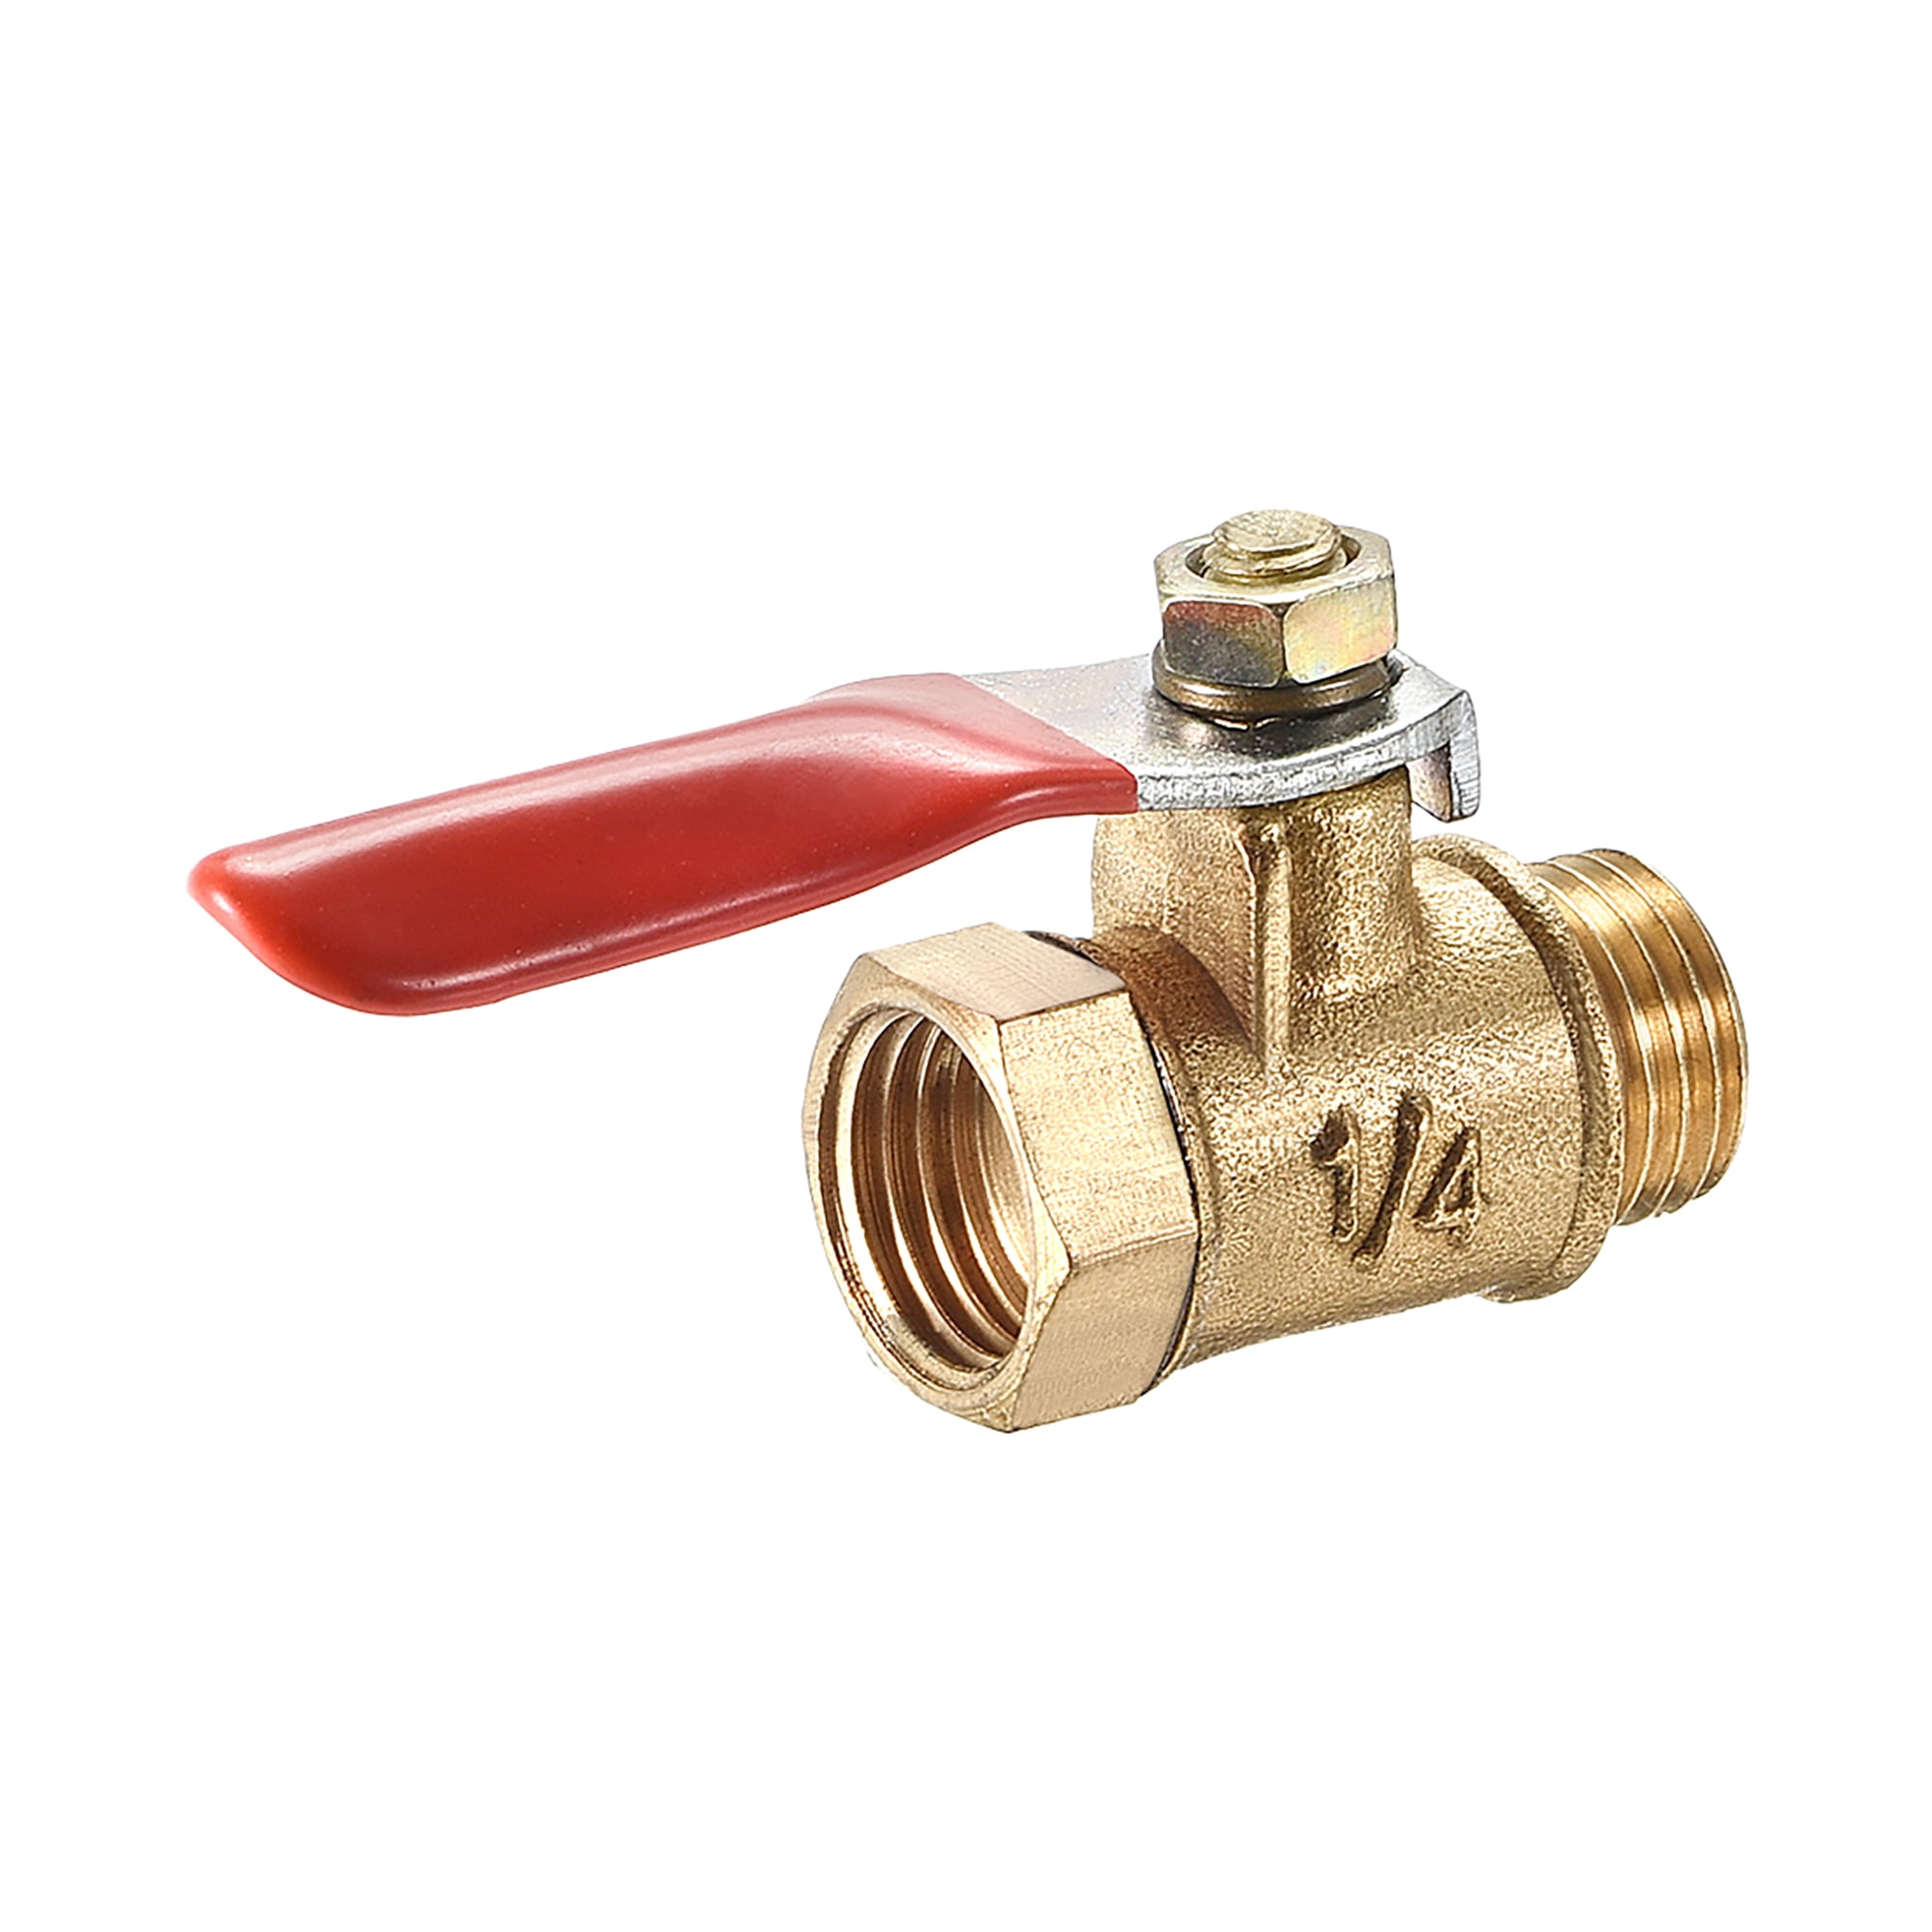 Brass Air Ball Valve Shut Off Switch G1/4 Male to Female Pipe Coupler ...